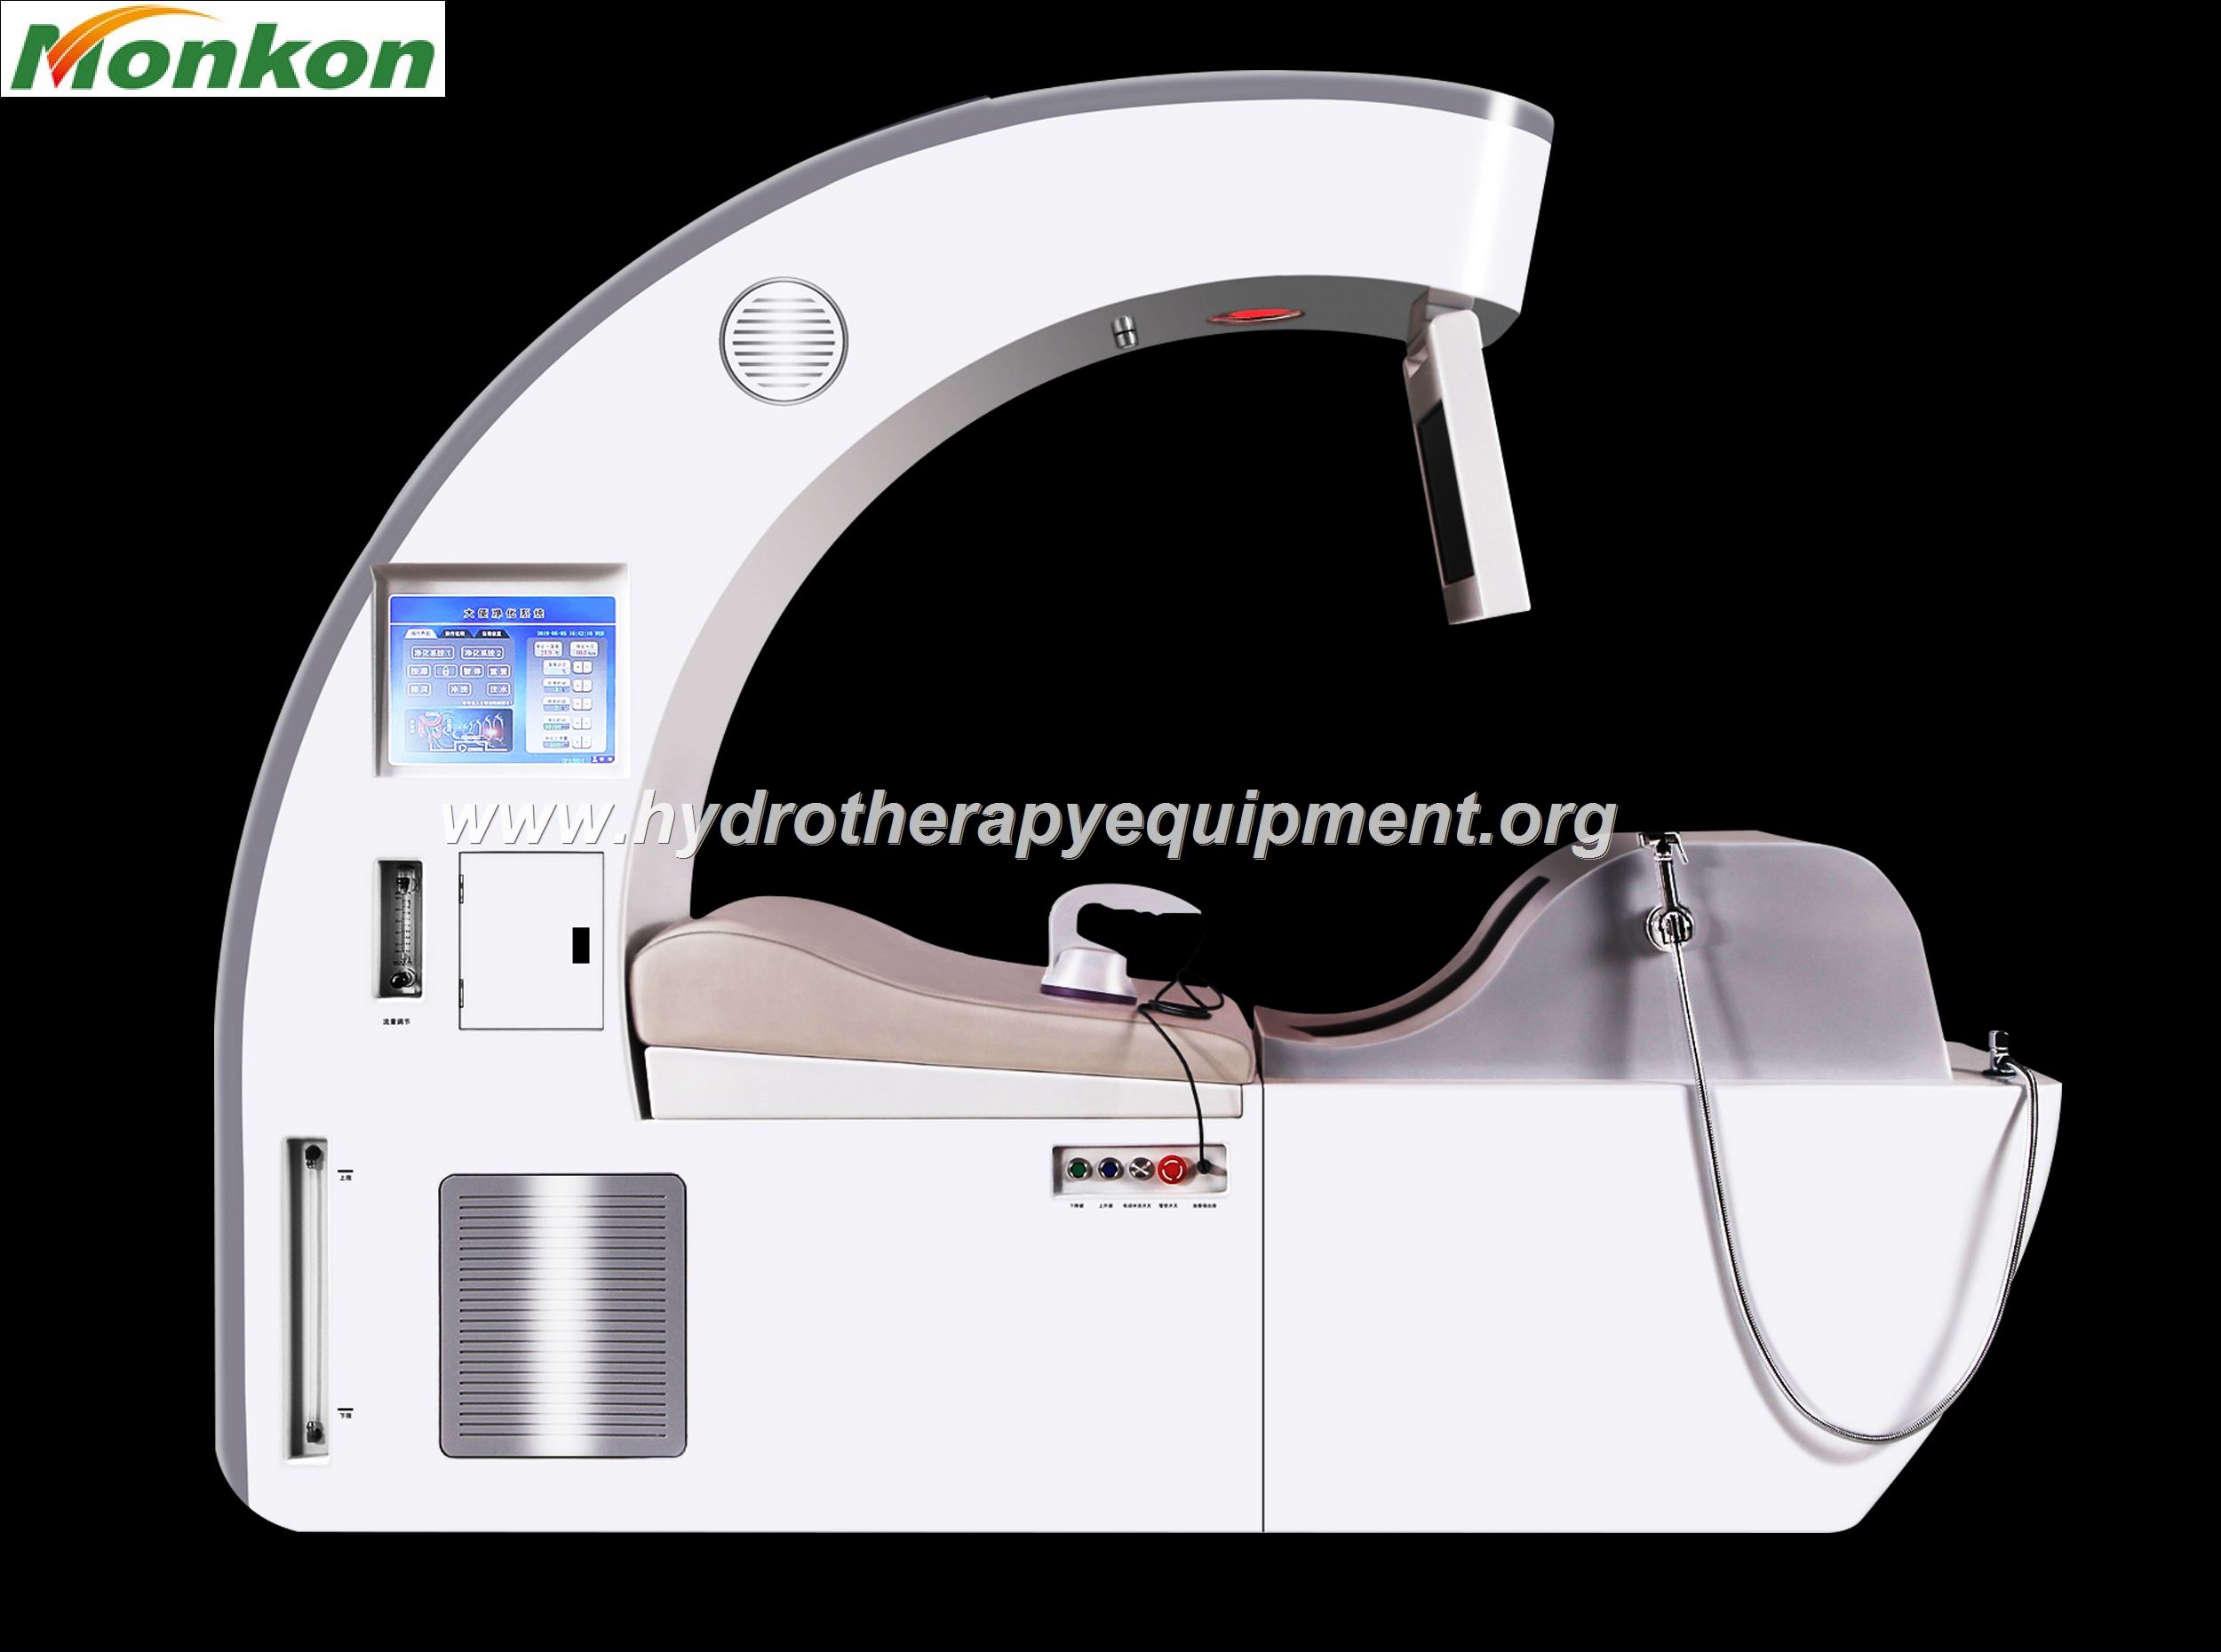 colon hydrotherapy equipment south africa